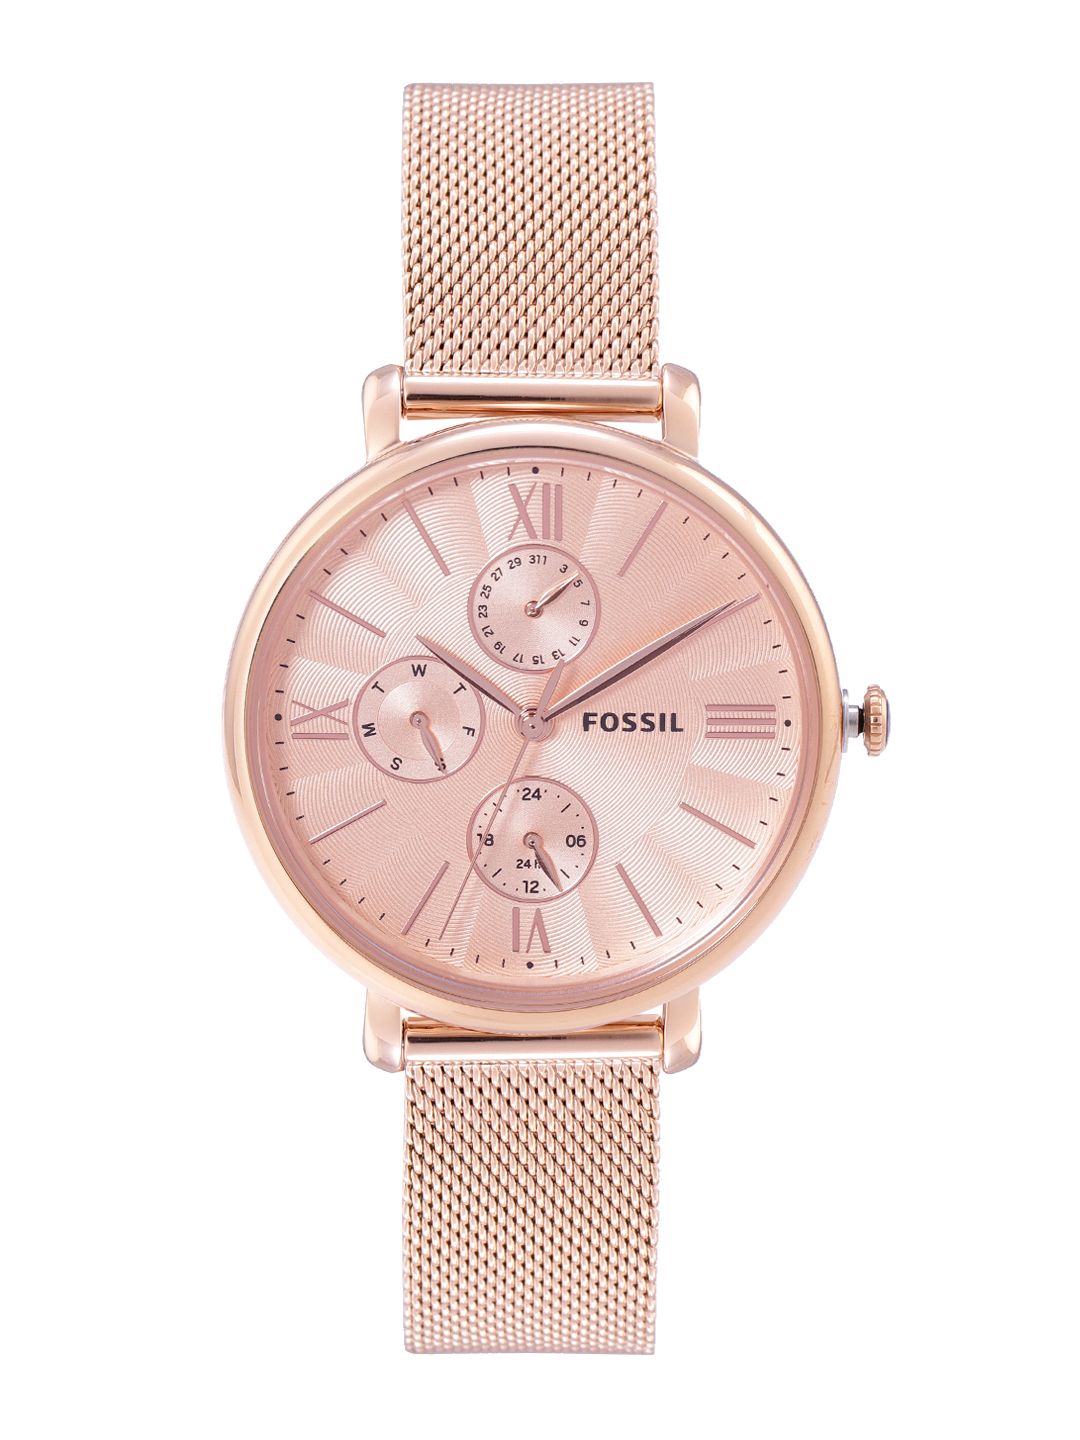 Fossil Women Rose Gold-Toned Analogue Watch ES5098 Price in India